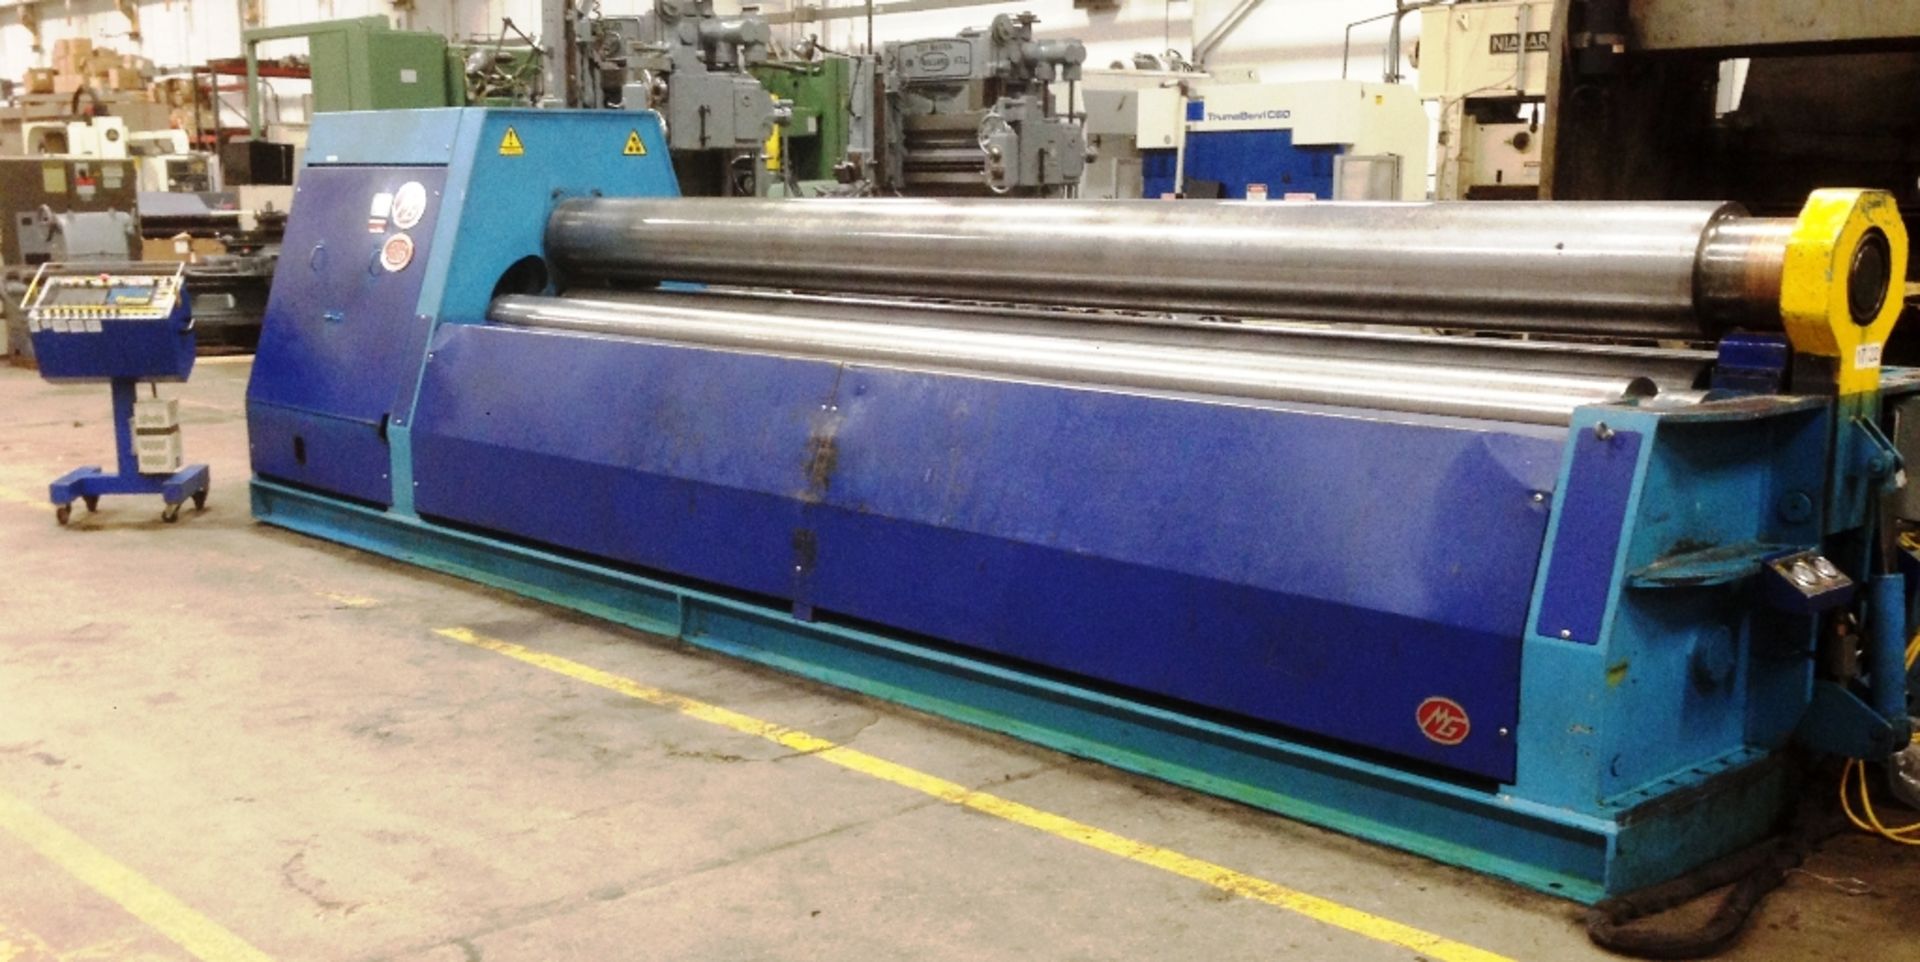 3/8" x 200" MG MODEL WH 510C 4-ROLL CNC PLATE BENDING ROLL Serial No. 04124 New 2004 EQUIPPED WITH - Image 2 of 9